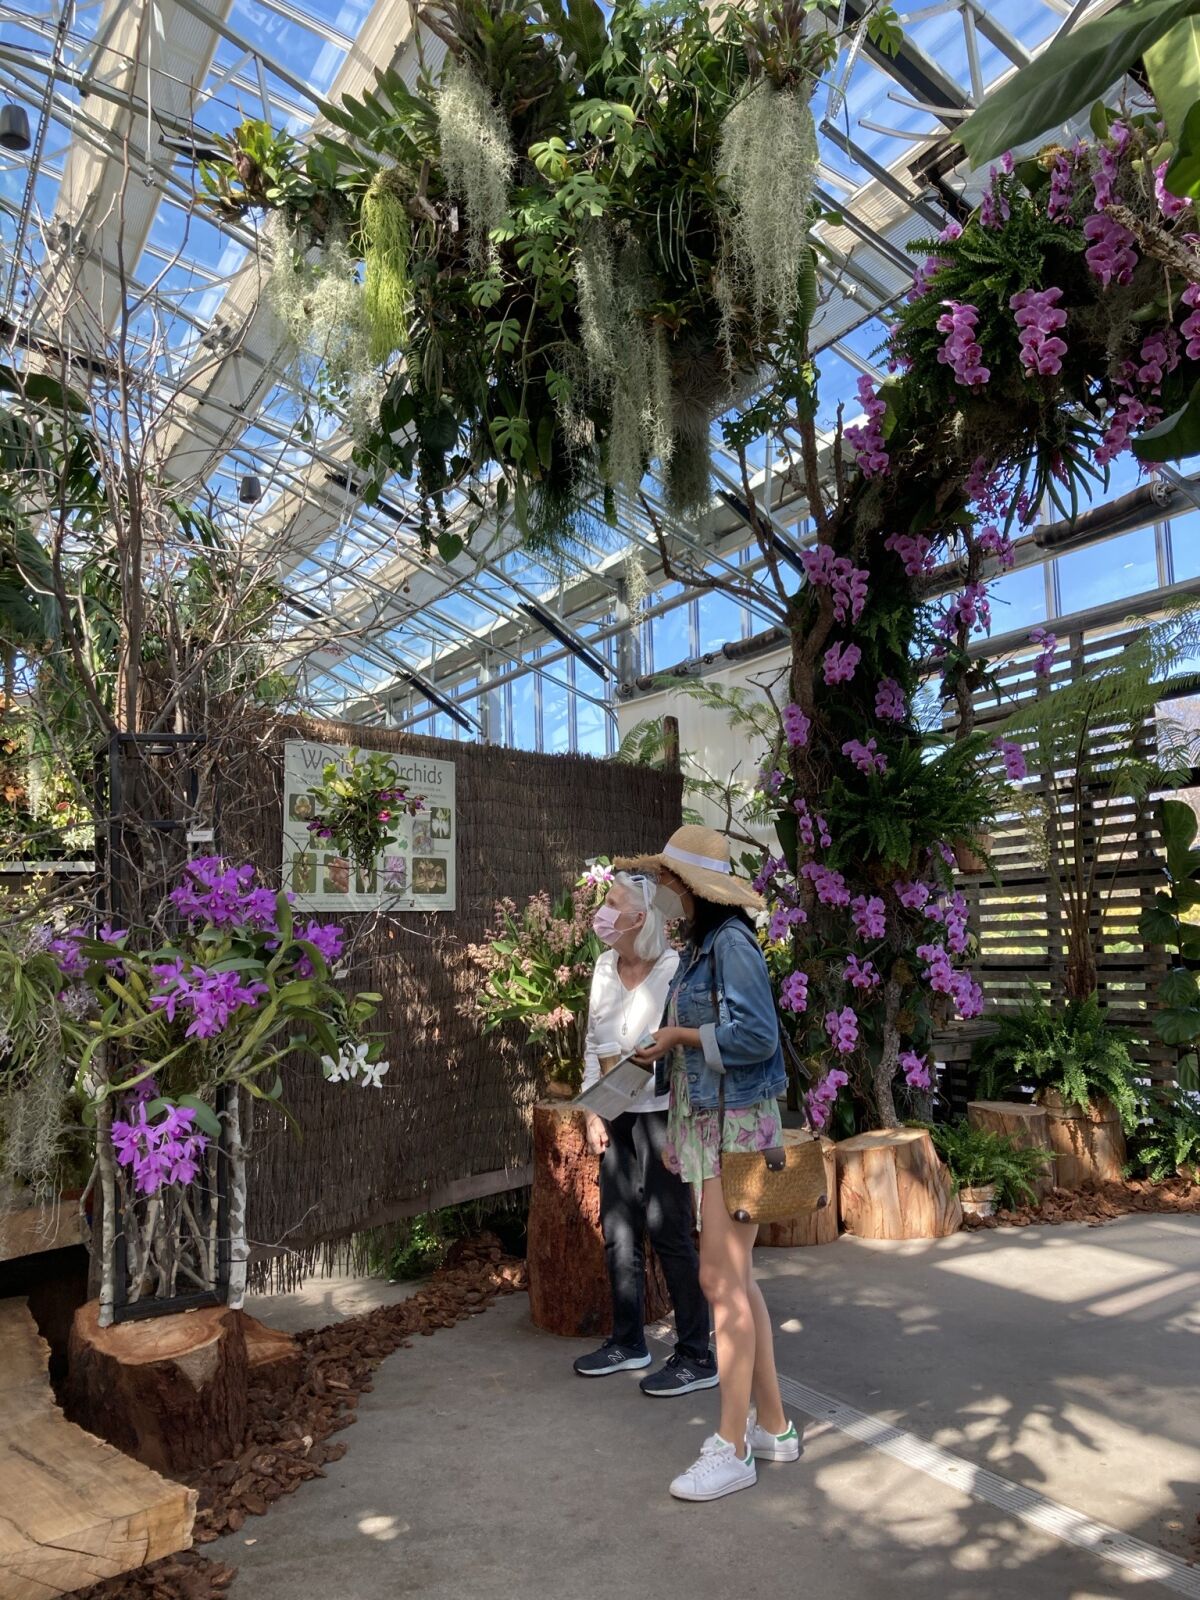 Visitors at SDBG's inaugural "World of Orchids" show held in 2021.